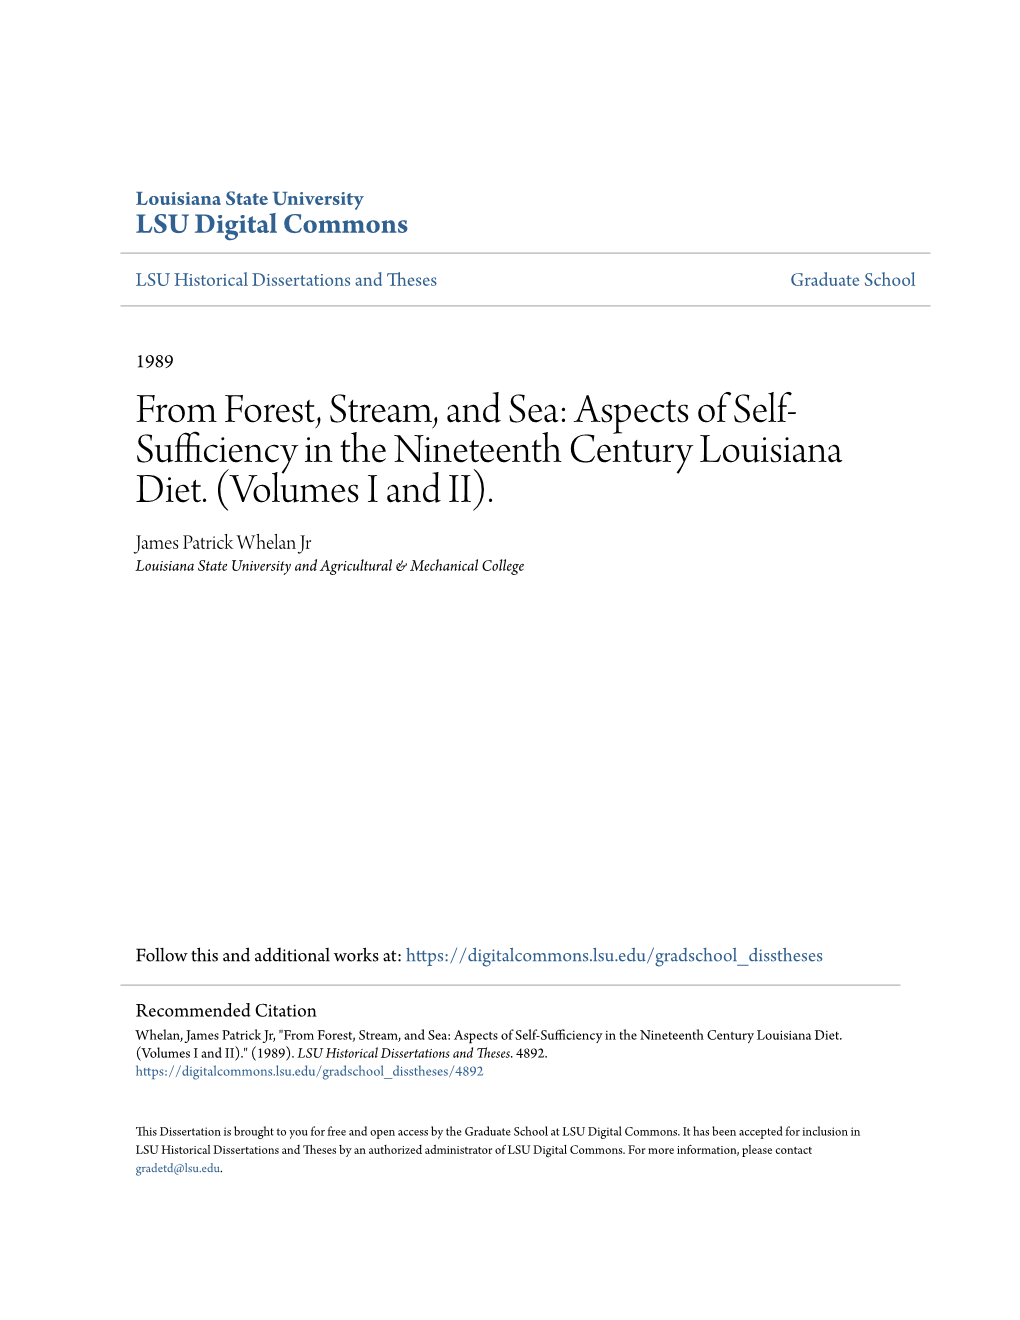 Aspects of Self-Sufficiency in the Nineteenth Century Louisiana Diet